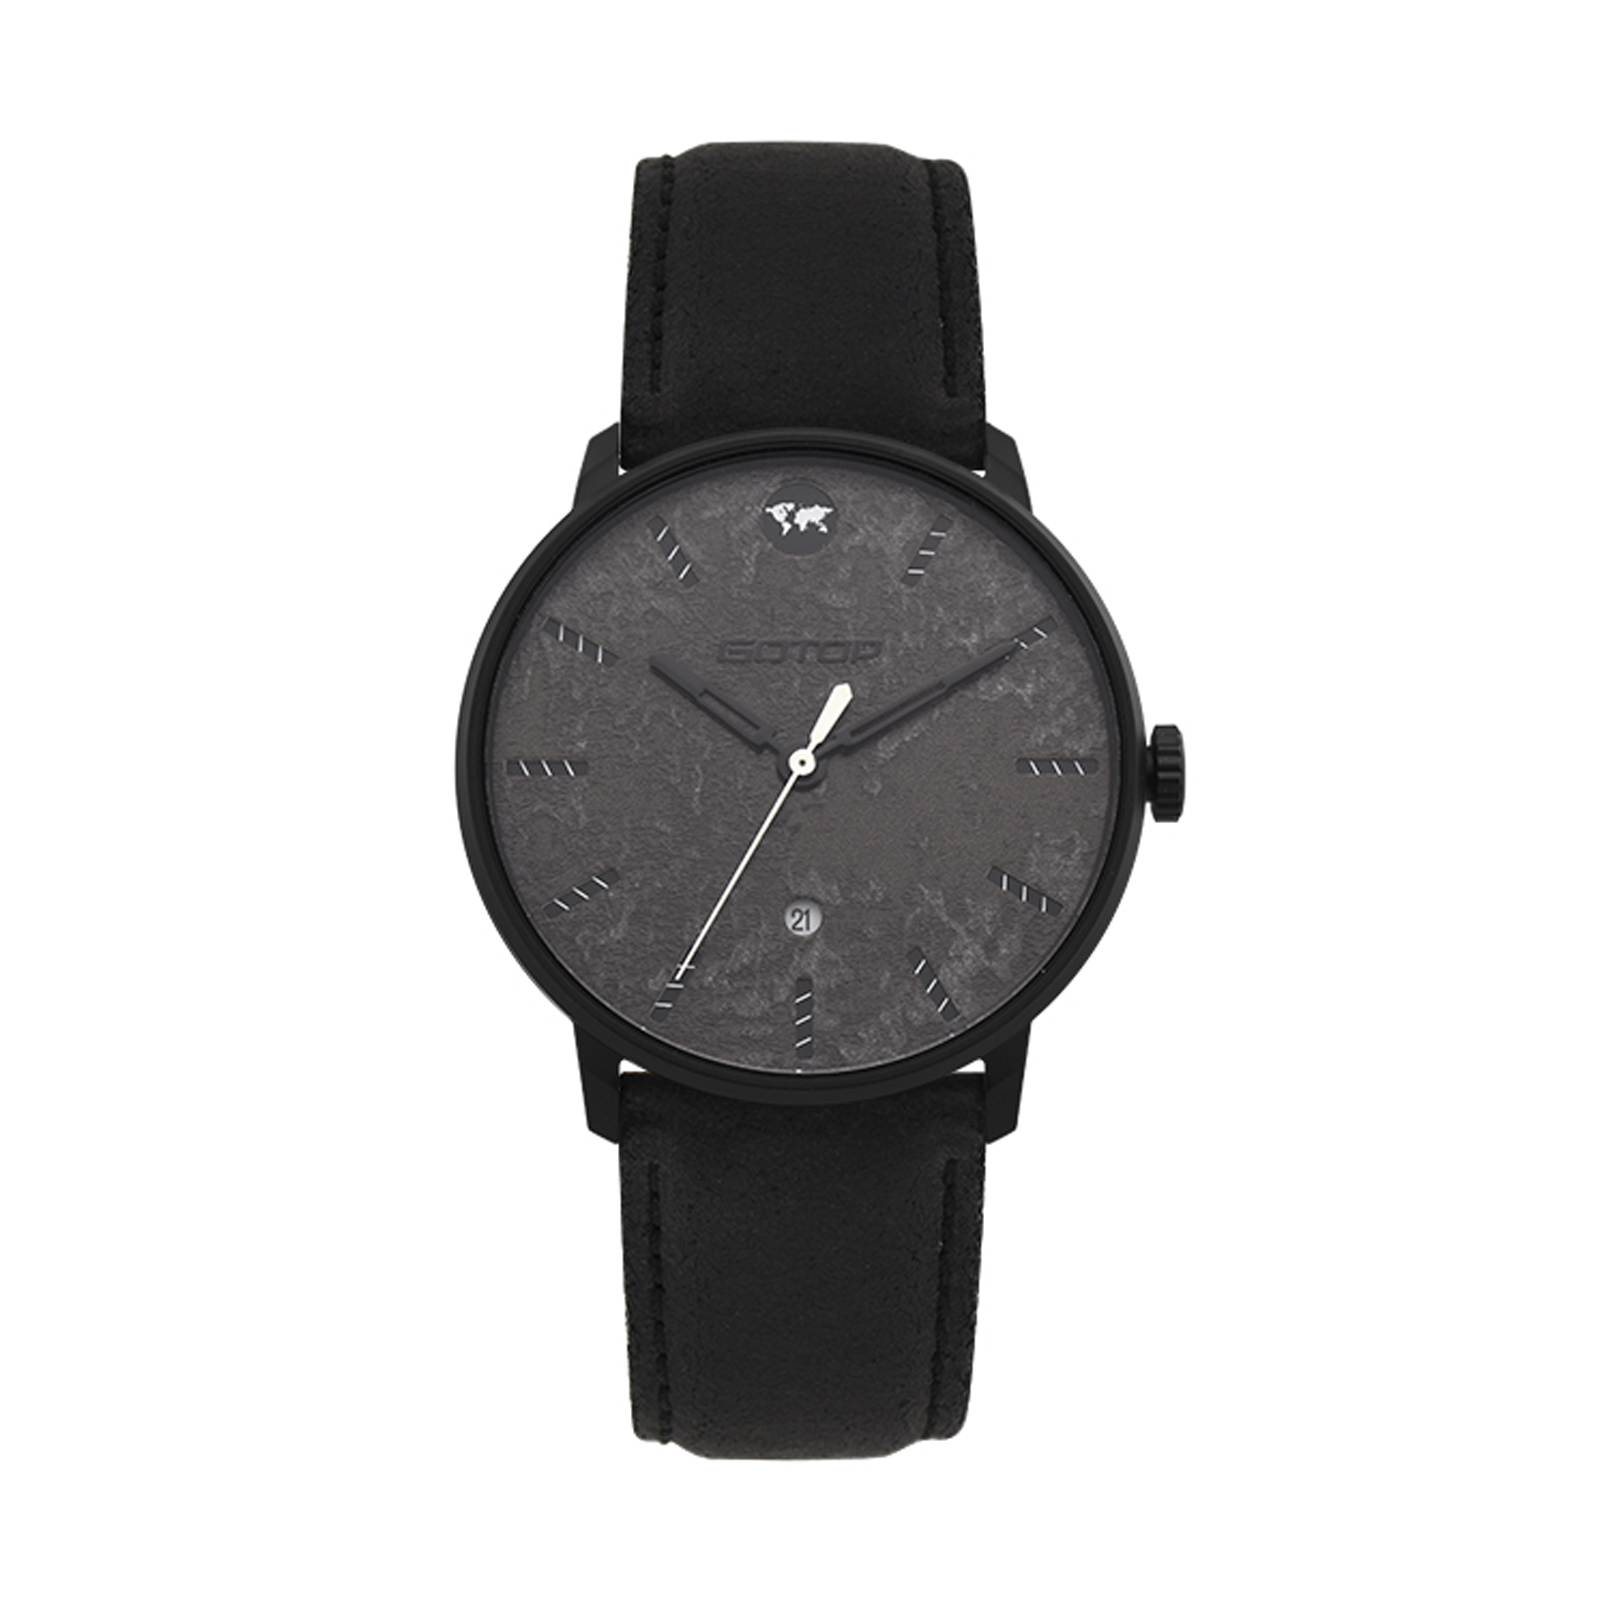 Men's Black Watch With Leather Strap